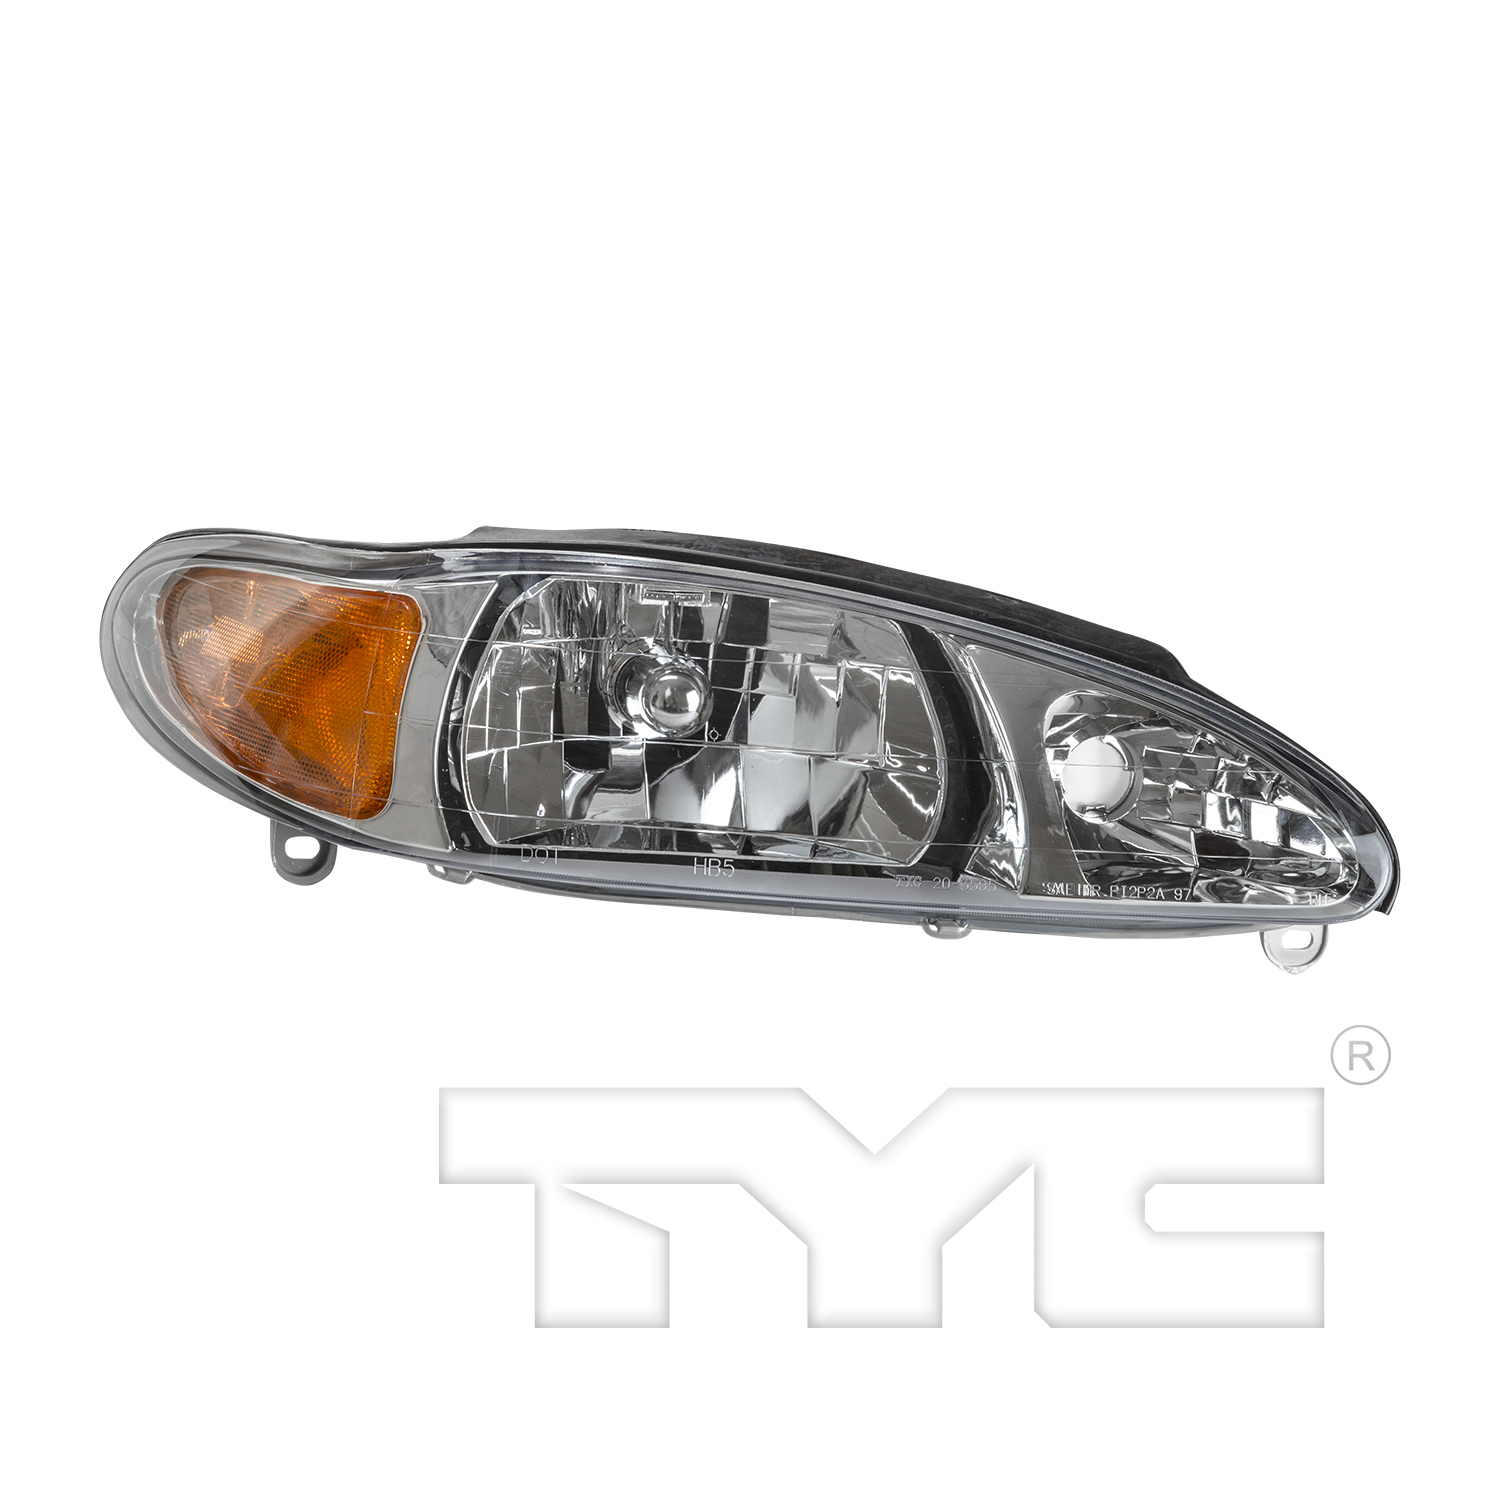 Aftermarket HEADLIGHTS for MERCURY - TRACER, TRACER,97-99,RT Headlamp assy composite